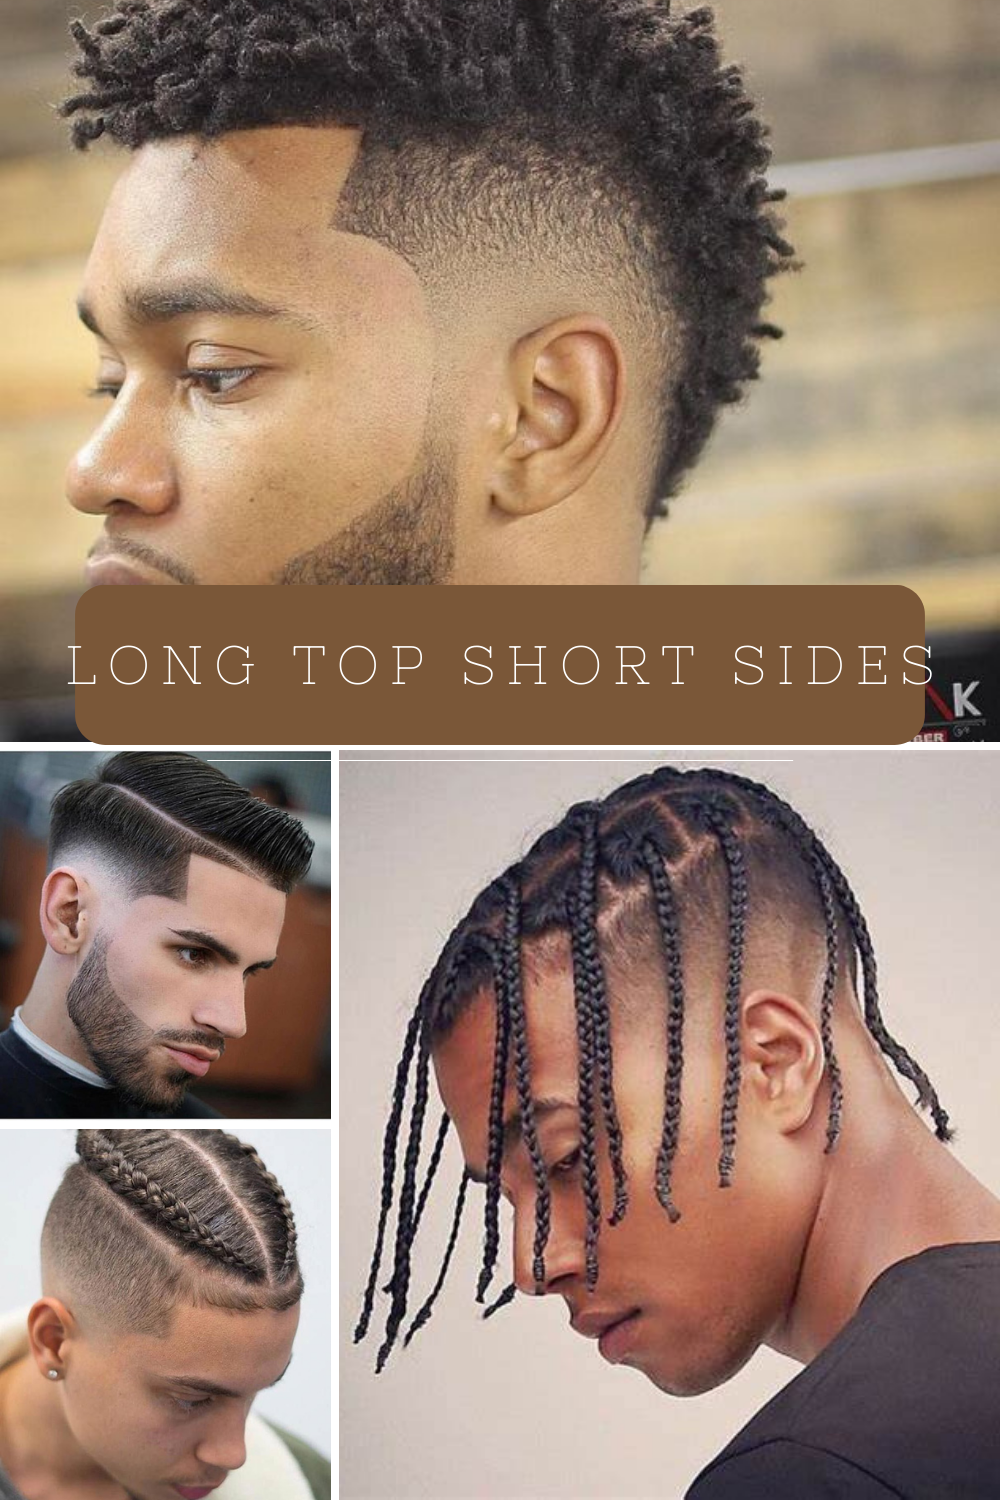 Mastering the 32 Short Sides, Long Top Haircut: A Style Guide Top Beauty Magazines